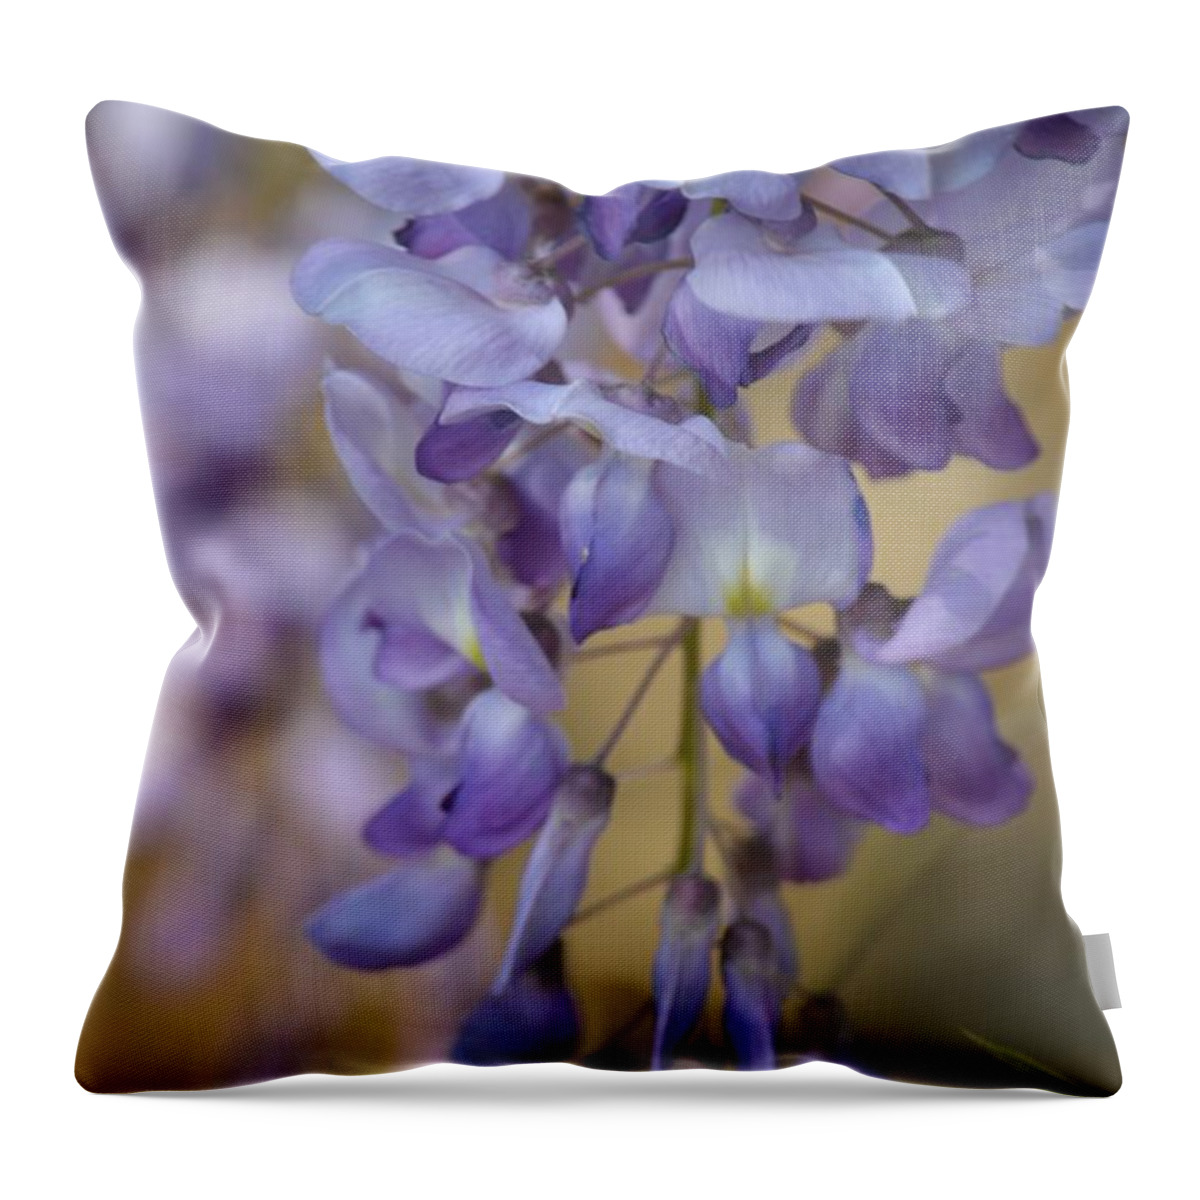 Wisteria 15-04 Throw Pillow featuring the photograph Wisteria 15-04 by Maria Urso